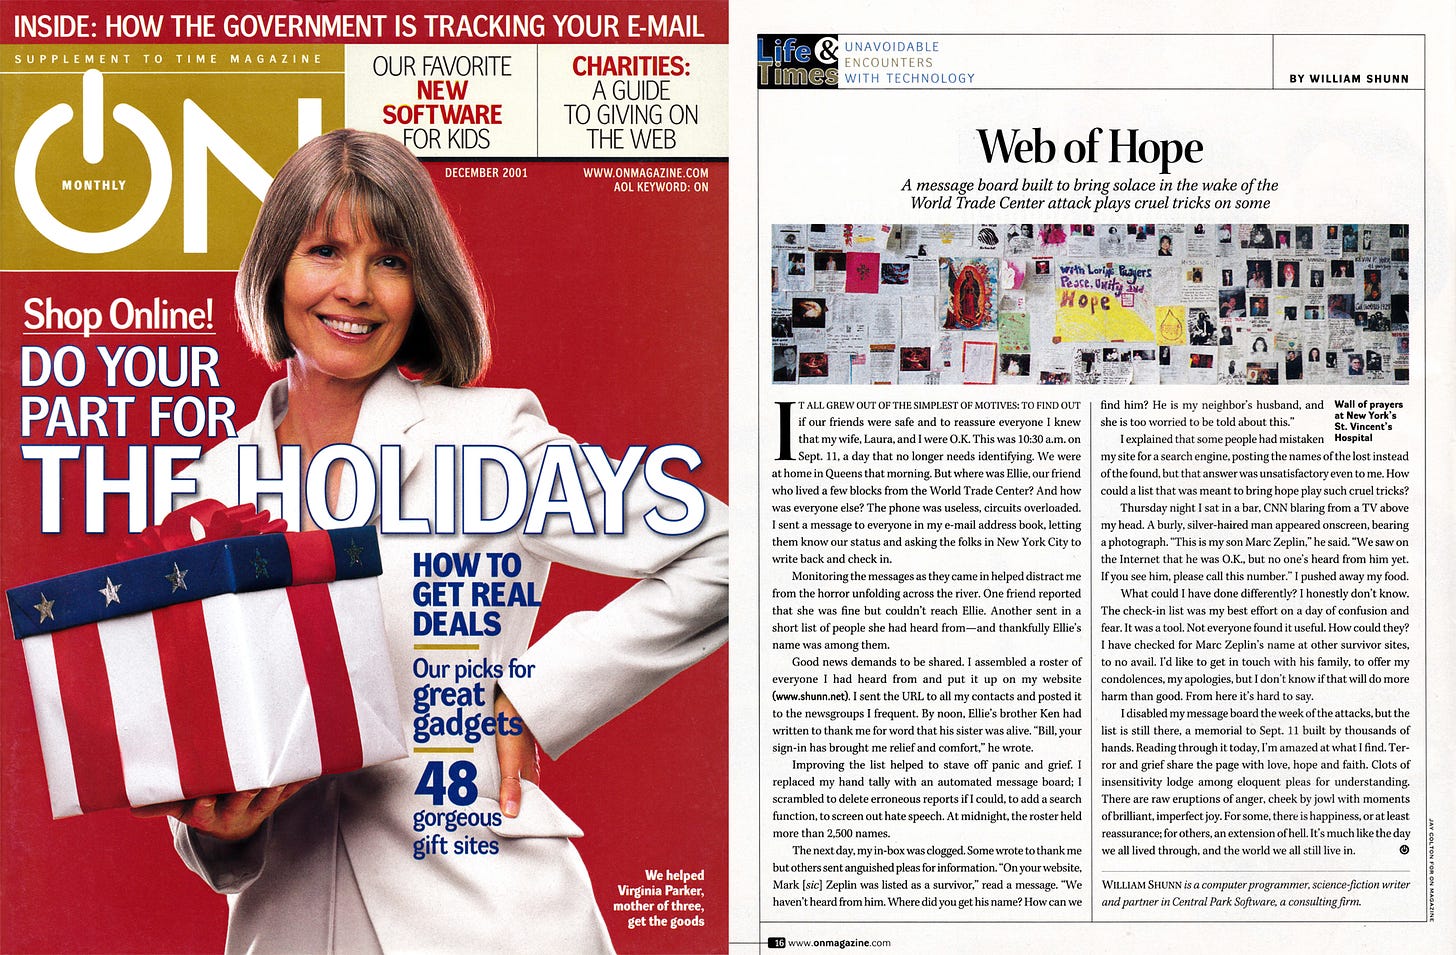 Collage of the December 2001 cover for "ON Magazine" (a smiling gray-haired woman in a white suit holding a stars-and-stripes-wrapped present against a red background, with the headling "Shop Online! Do Your Part for the Holidays"), and page 16 of the magazine (featuring the column "Web of Hope" by William Shunn).